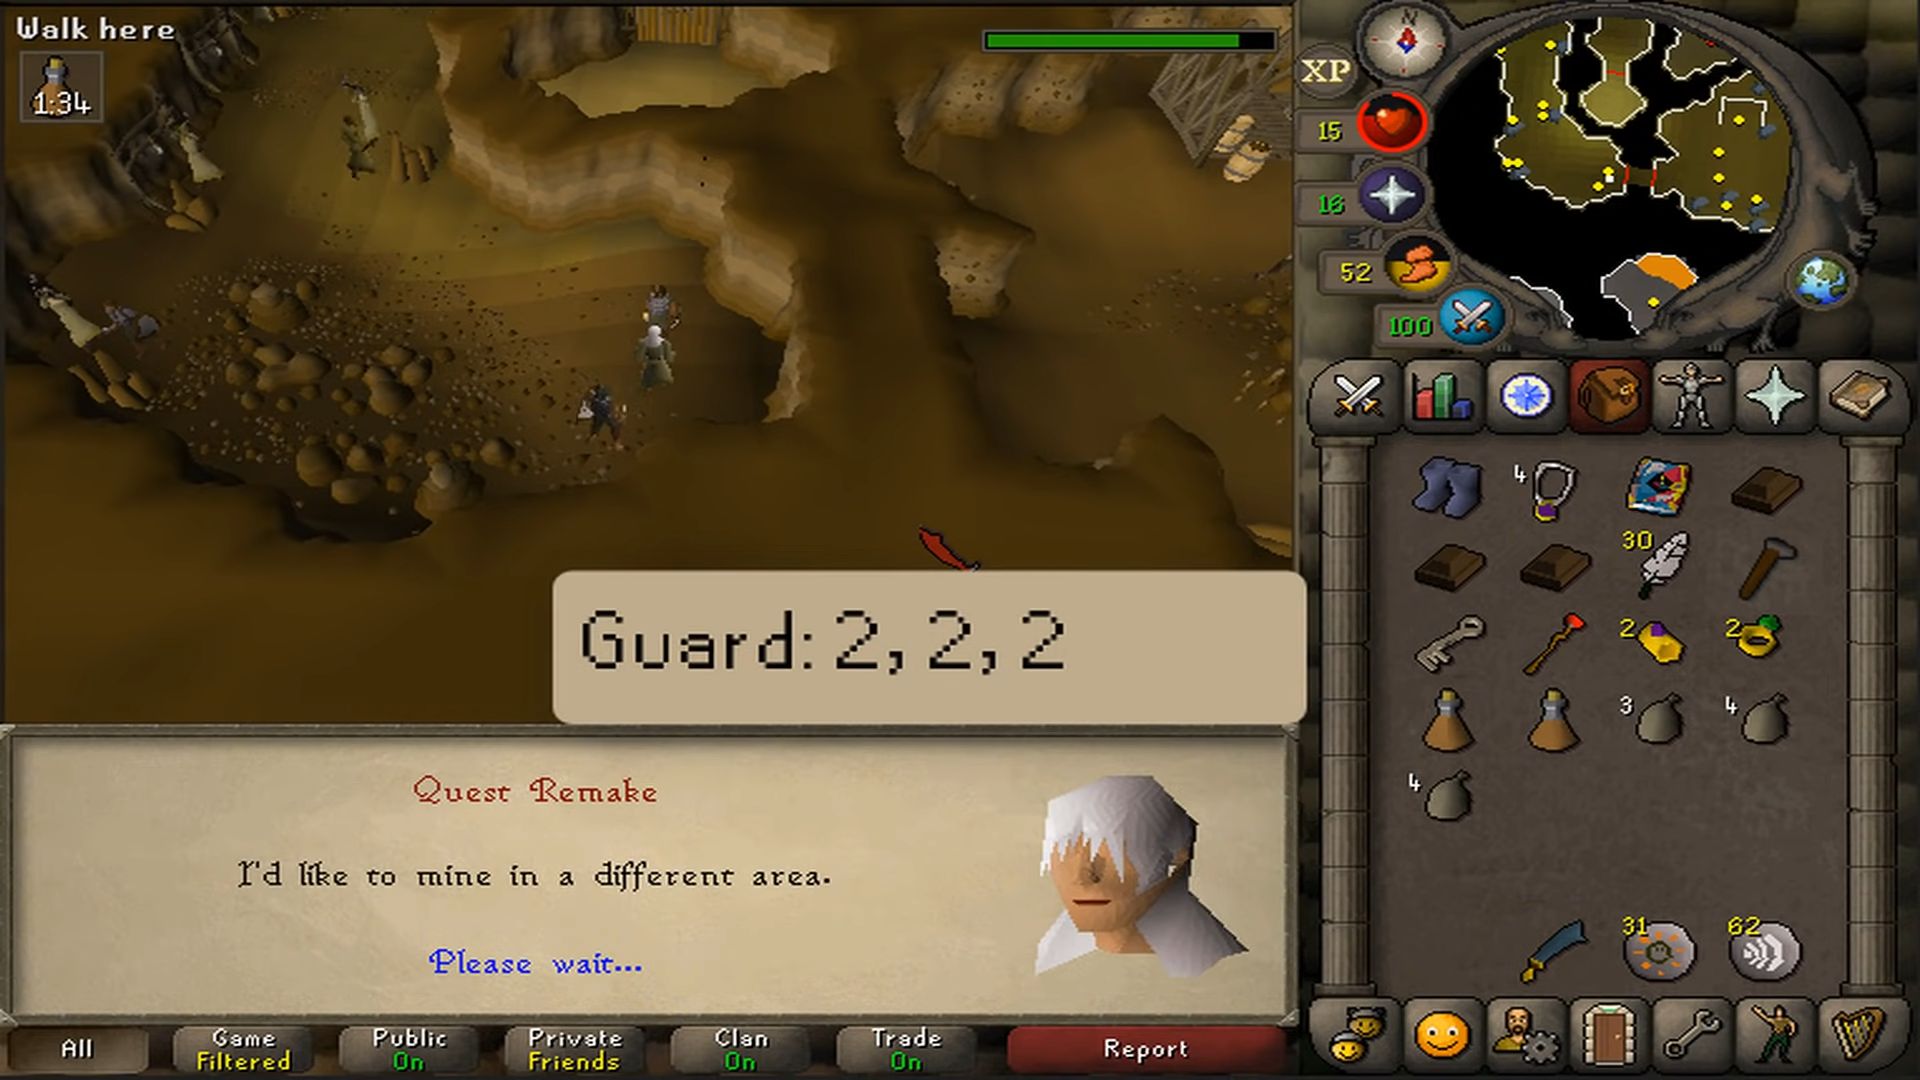 OSRS Tourist Trap - Talk to the guards and tell them you want to work in a different area